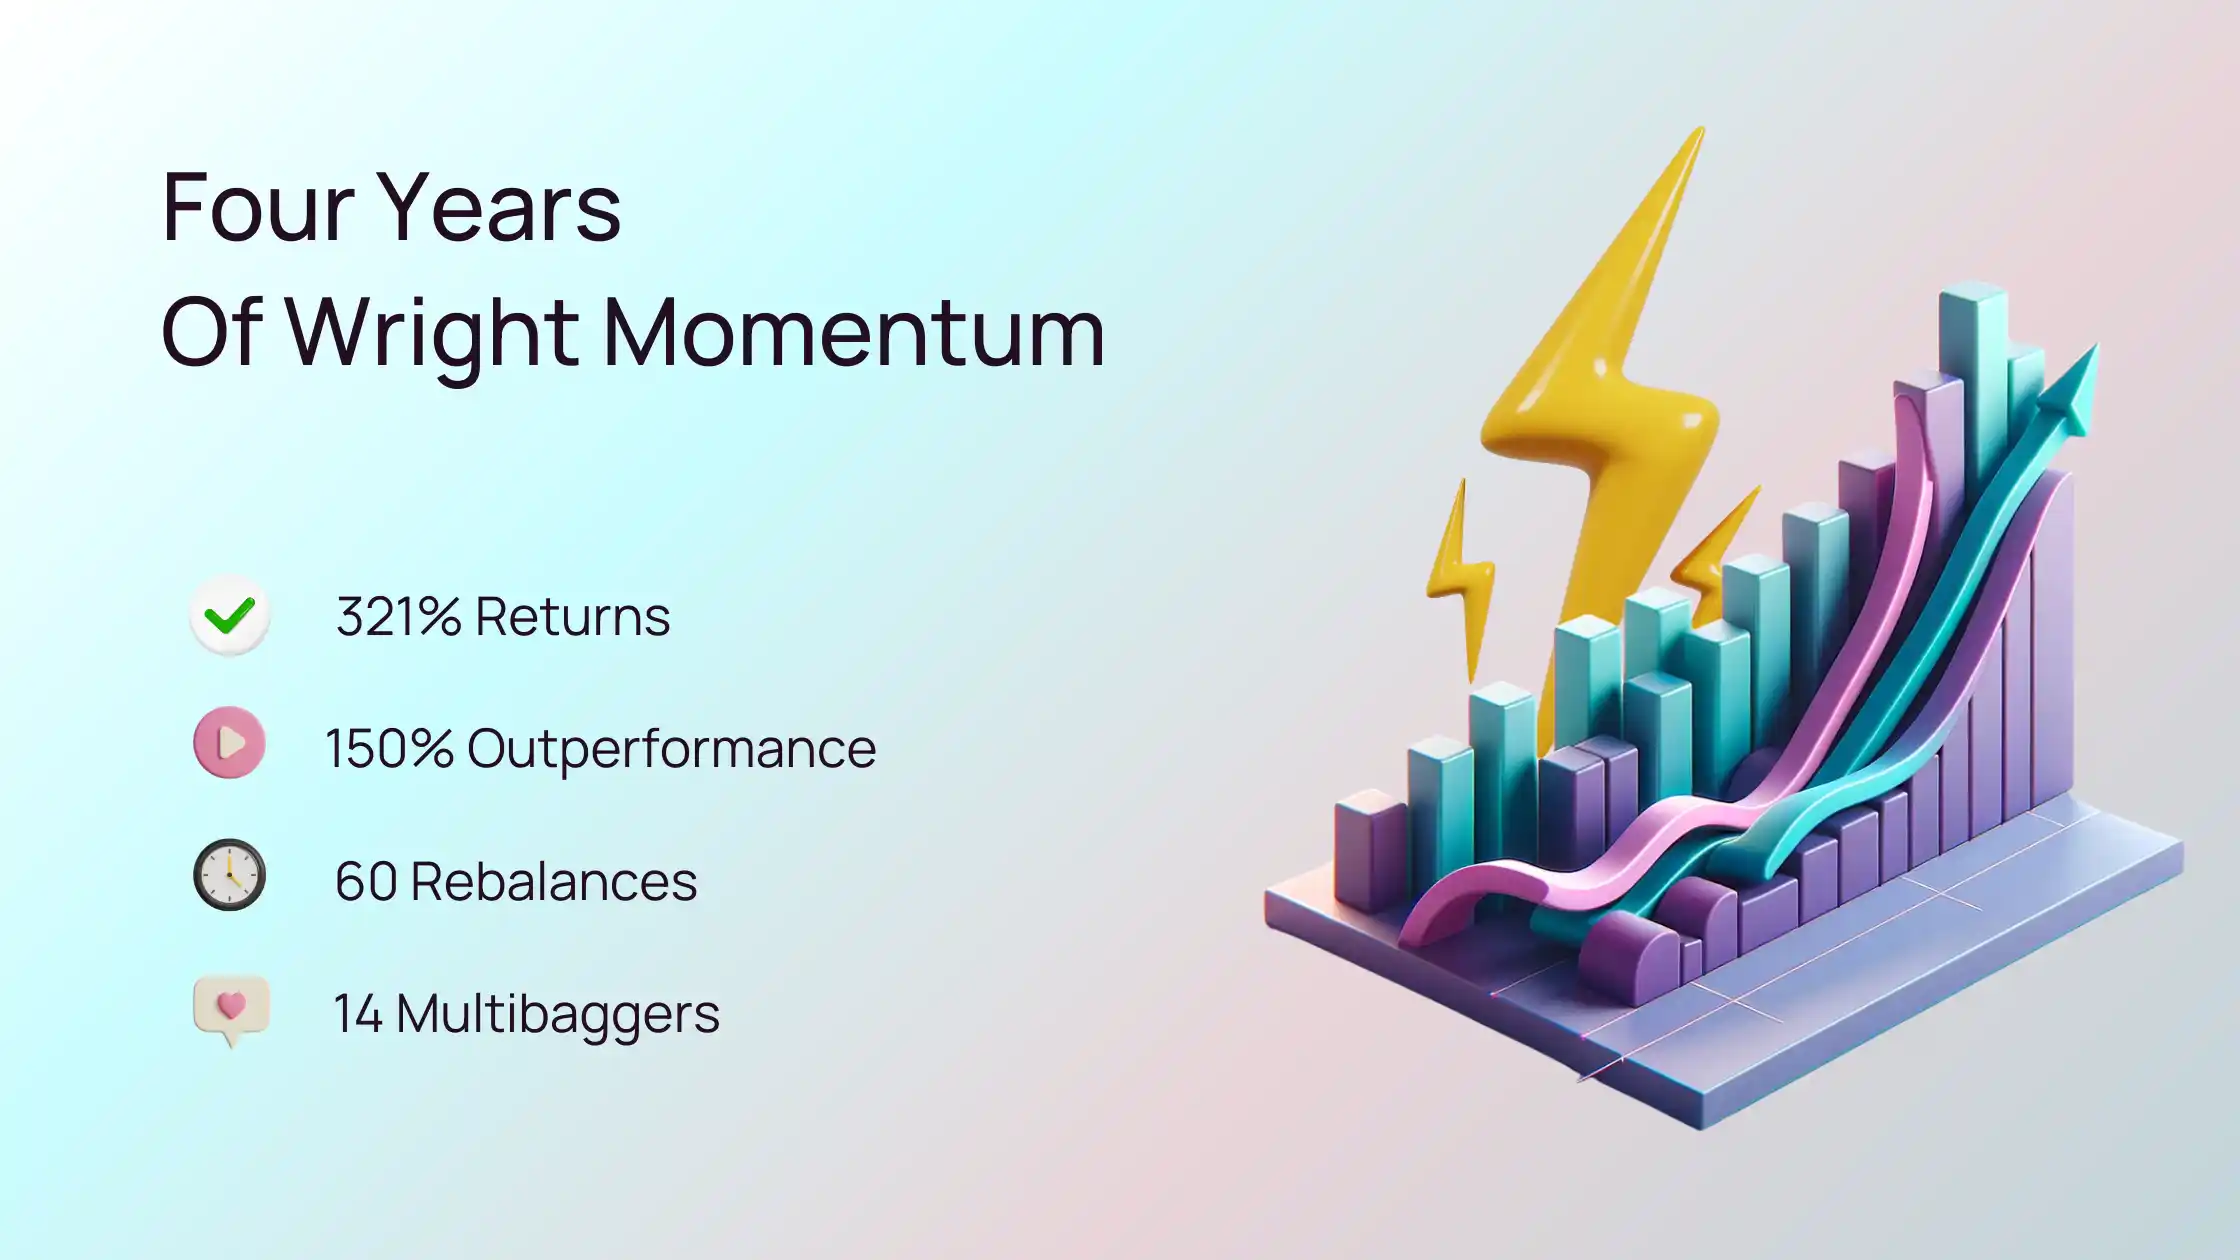 Four Years of Wright Momentum: Mastering the Art of Building a Successful Momentum Strategy